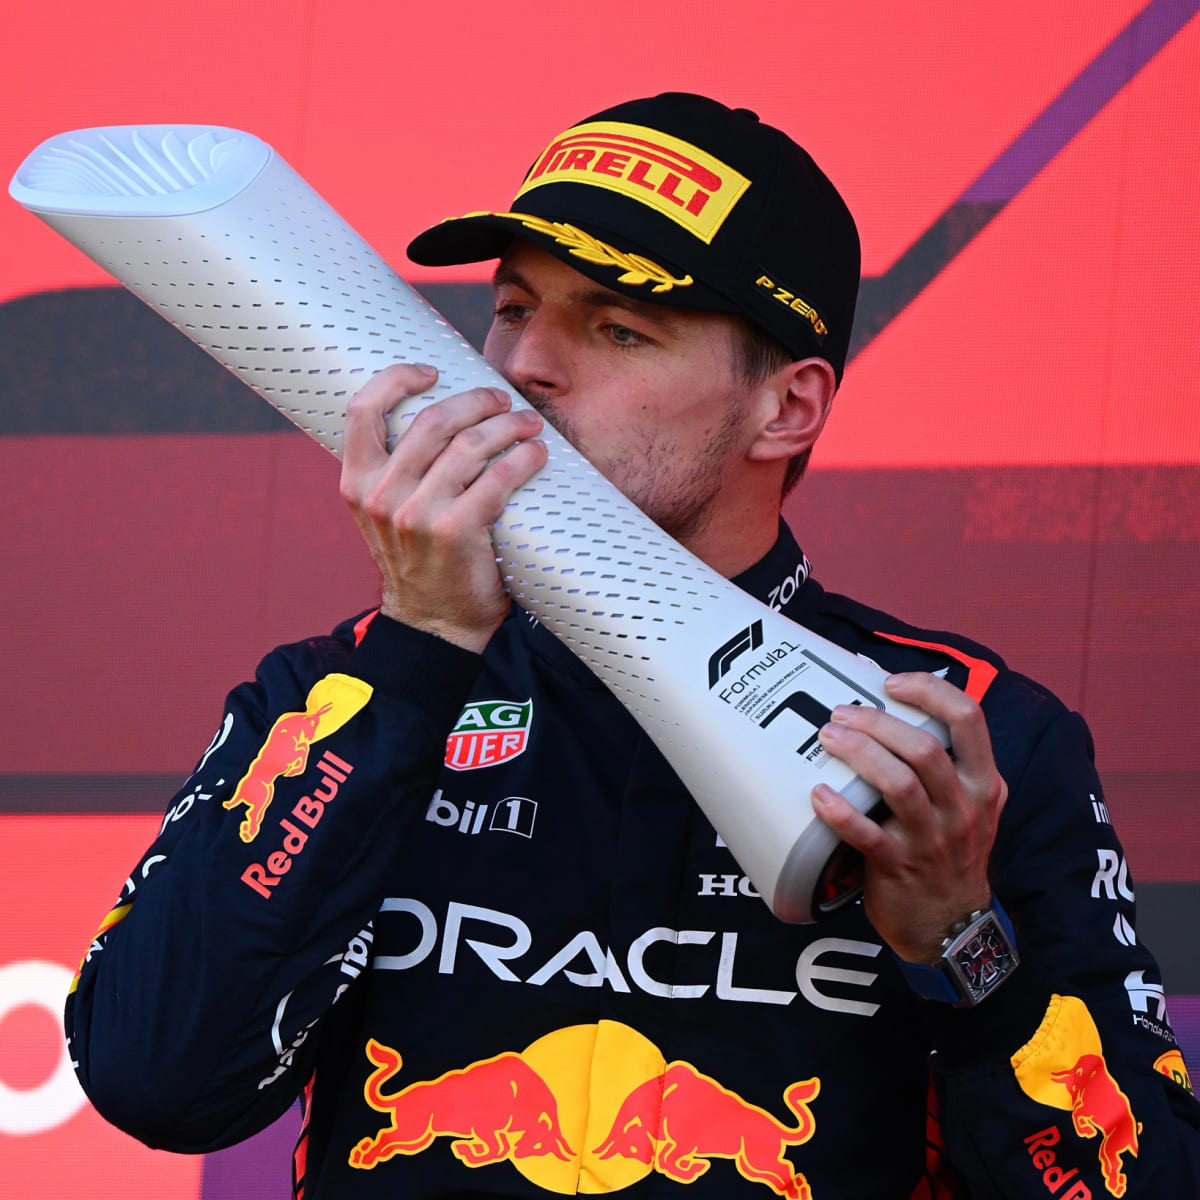 F1 News: Max Verstappen Reflects On Two Championships - More Than